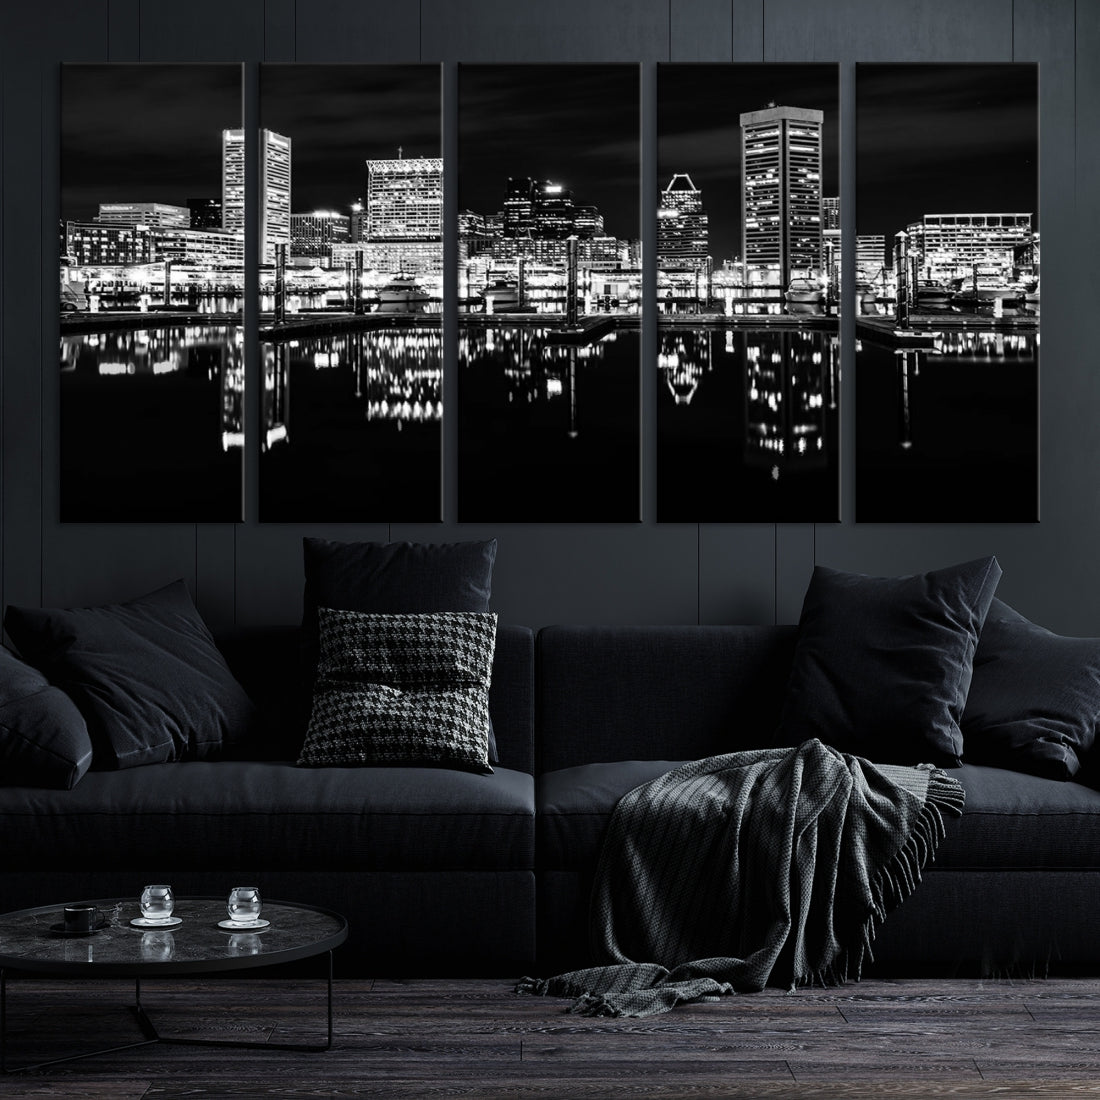 Black and White Baltimore Downtown Night Skyline Wall Art Cityscape Canvas Print